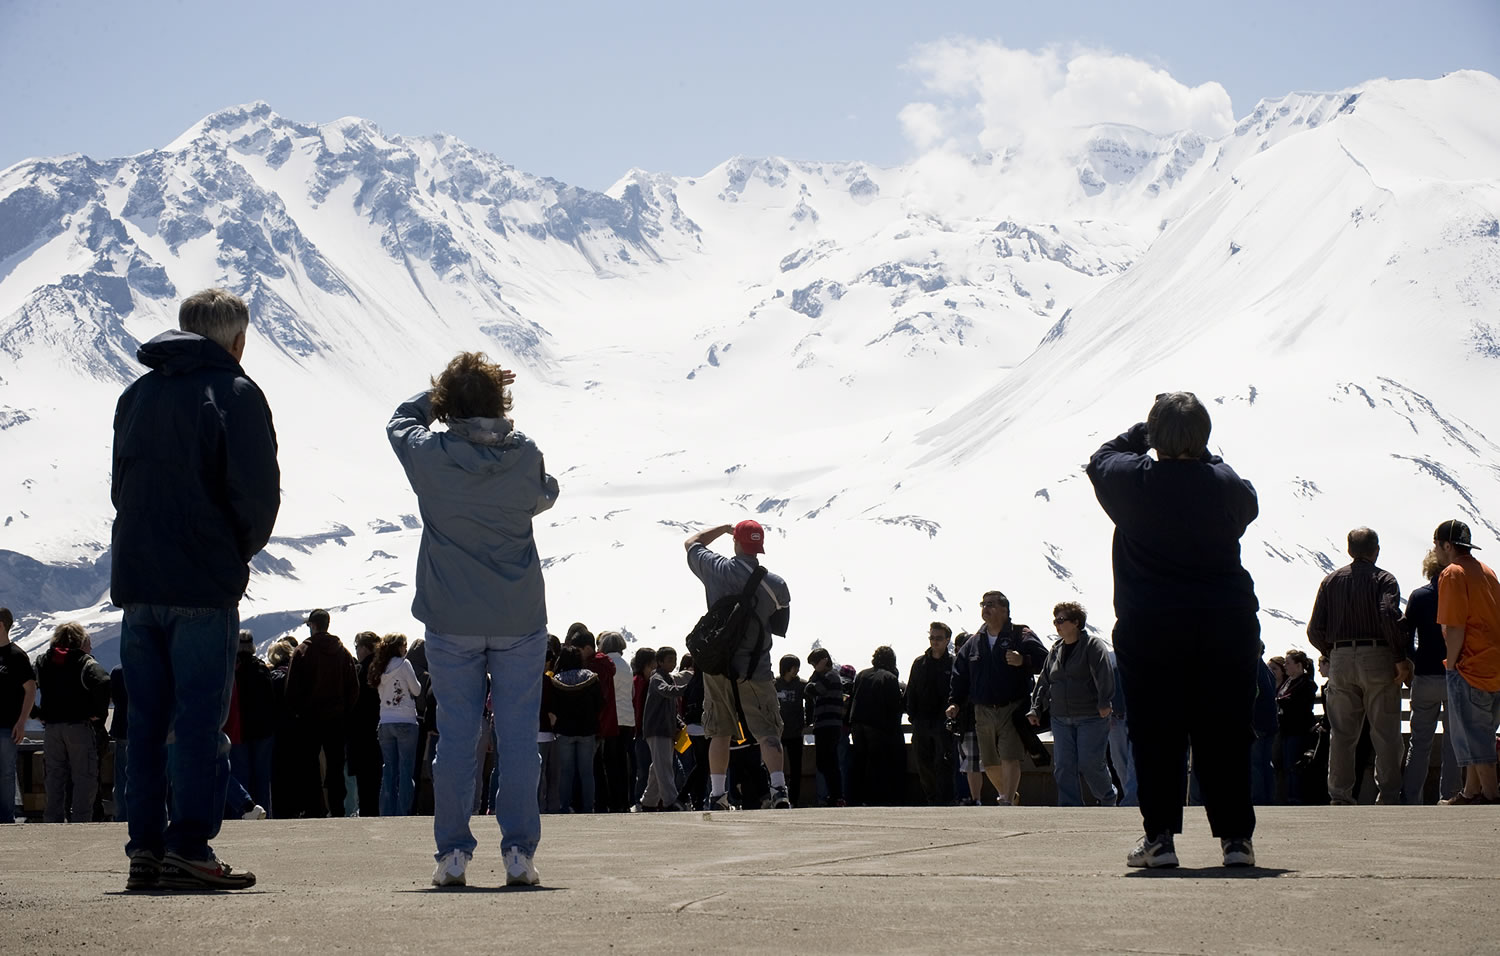 Visitors came from at least 20 different countries to see Mount St. Helens up close in 2011, according to a demographic study released last year.